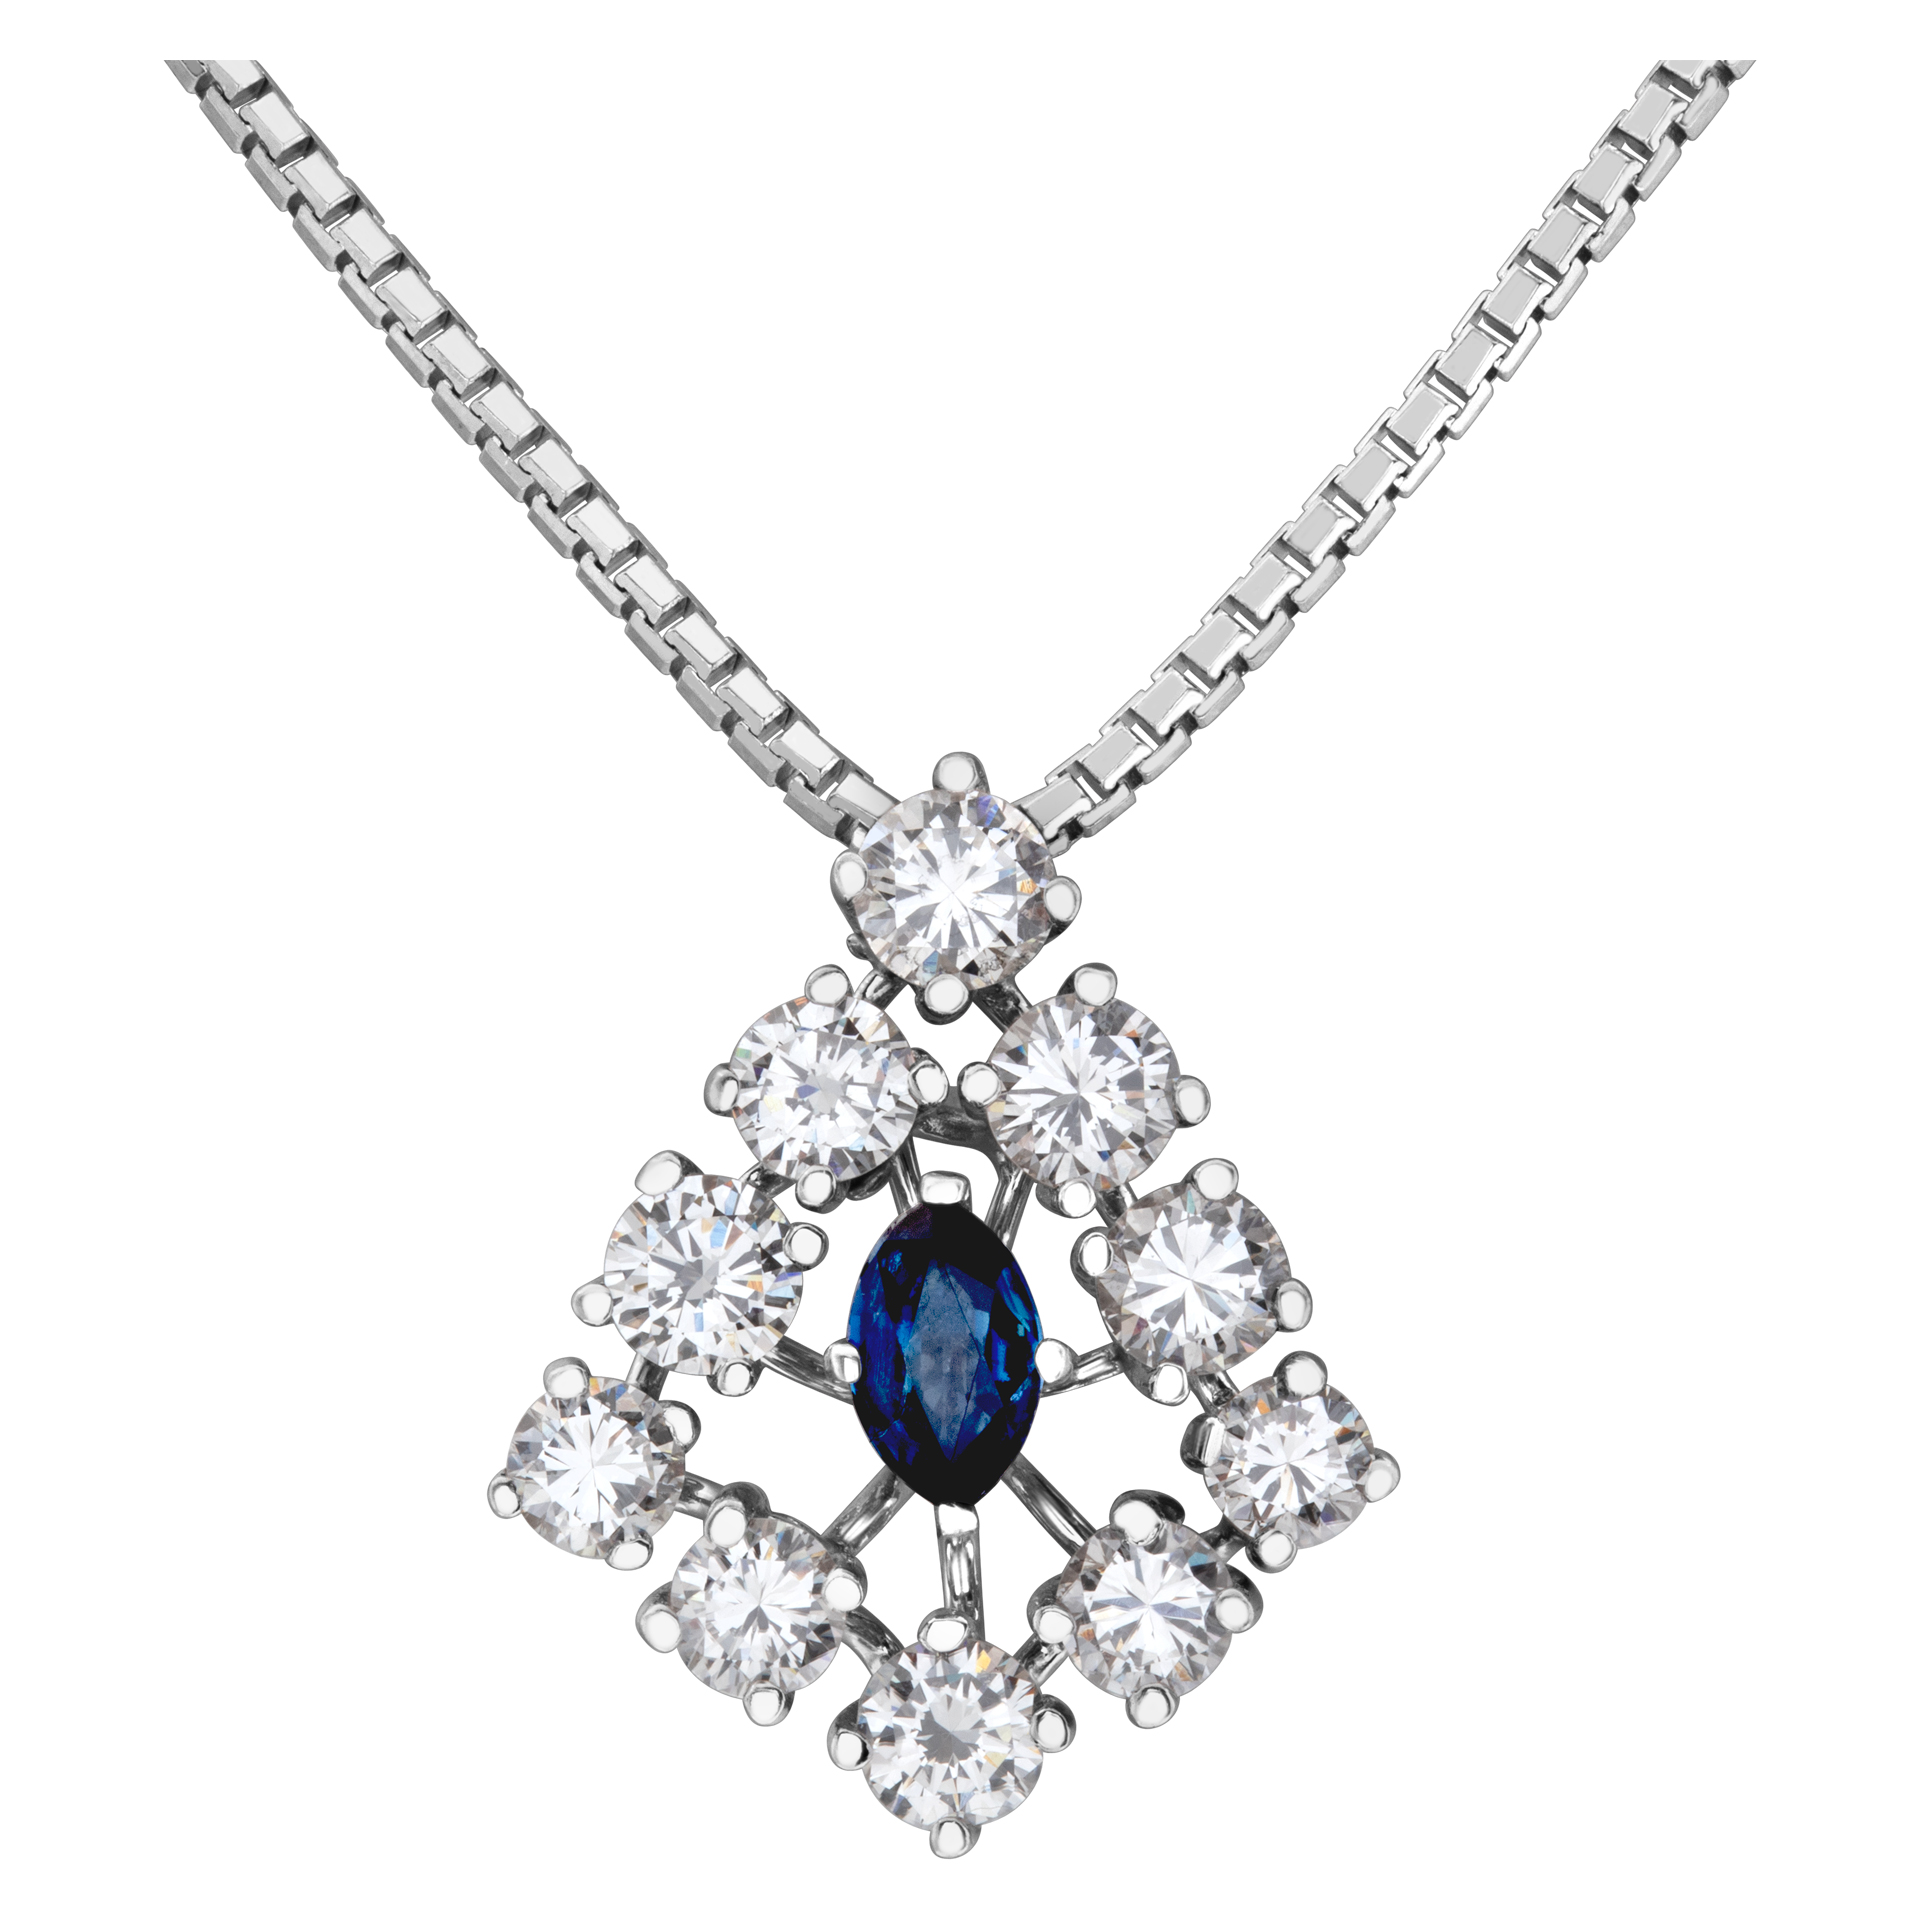 Necklace with diamonds and sapphire in 18k white gold